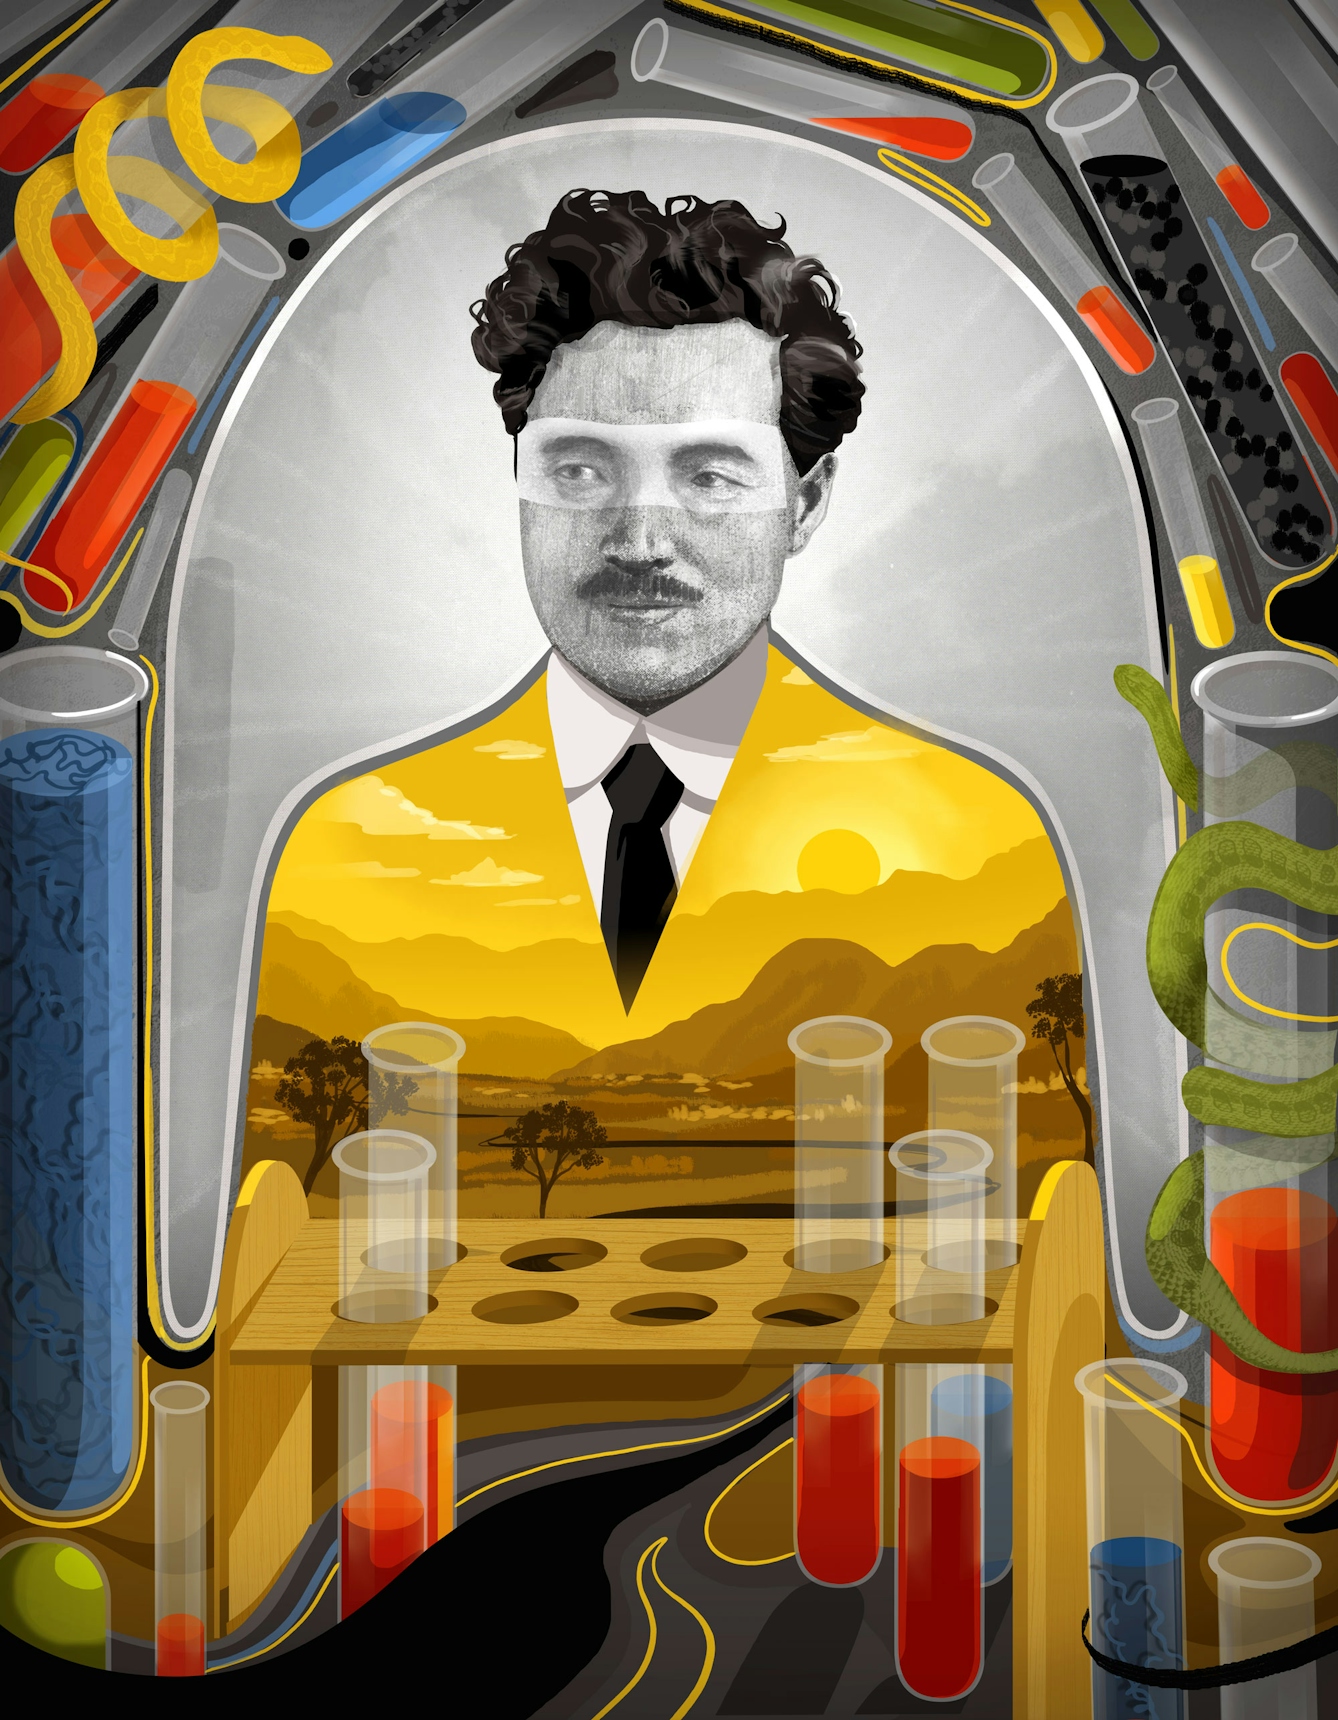 Illustration of Hideyo Noguchi showing an African landscape in the space of his torso, and a frame depicting test tubes and snakes.